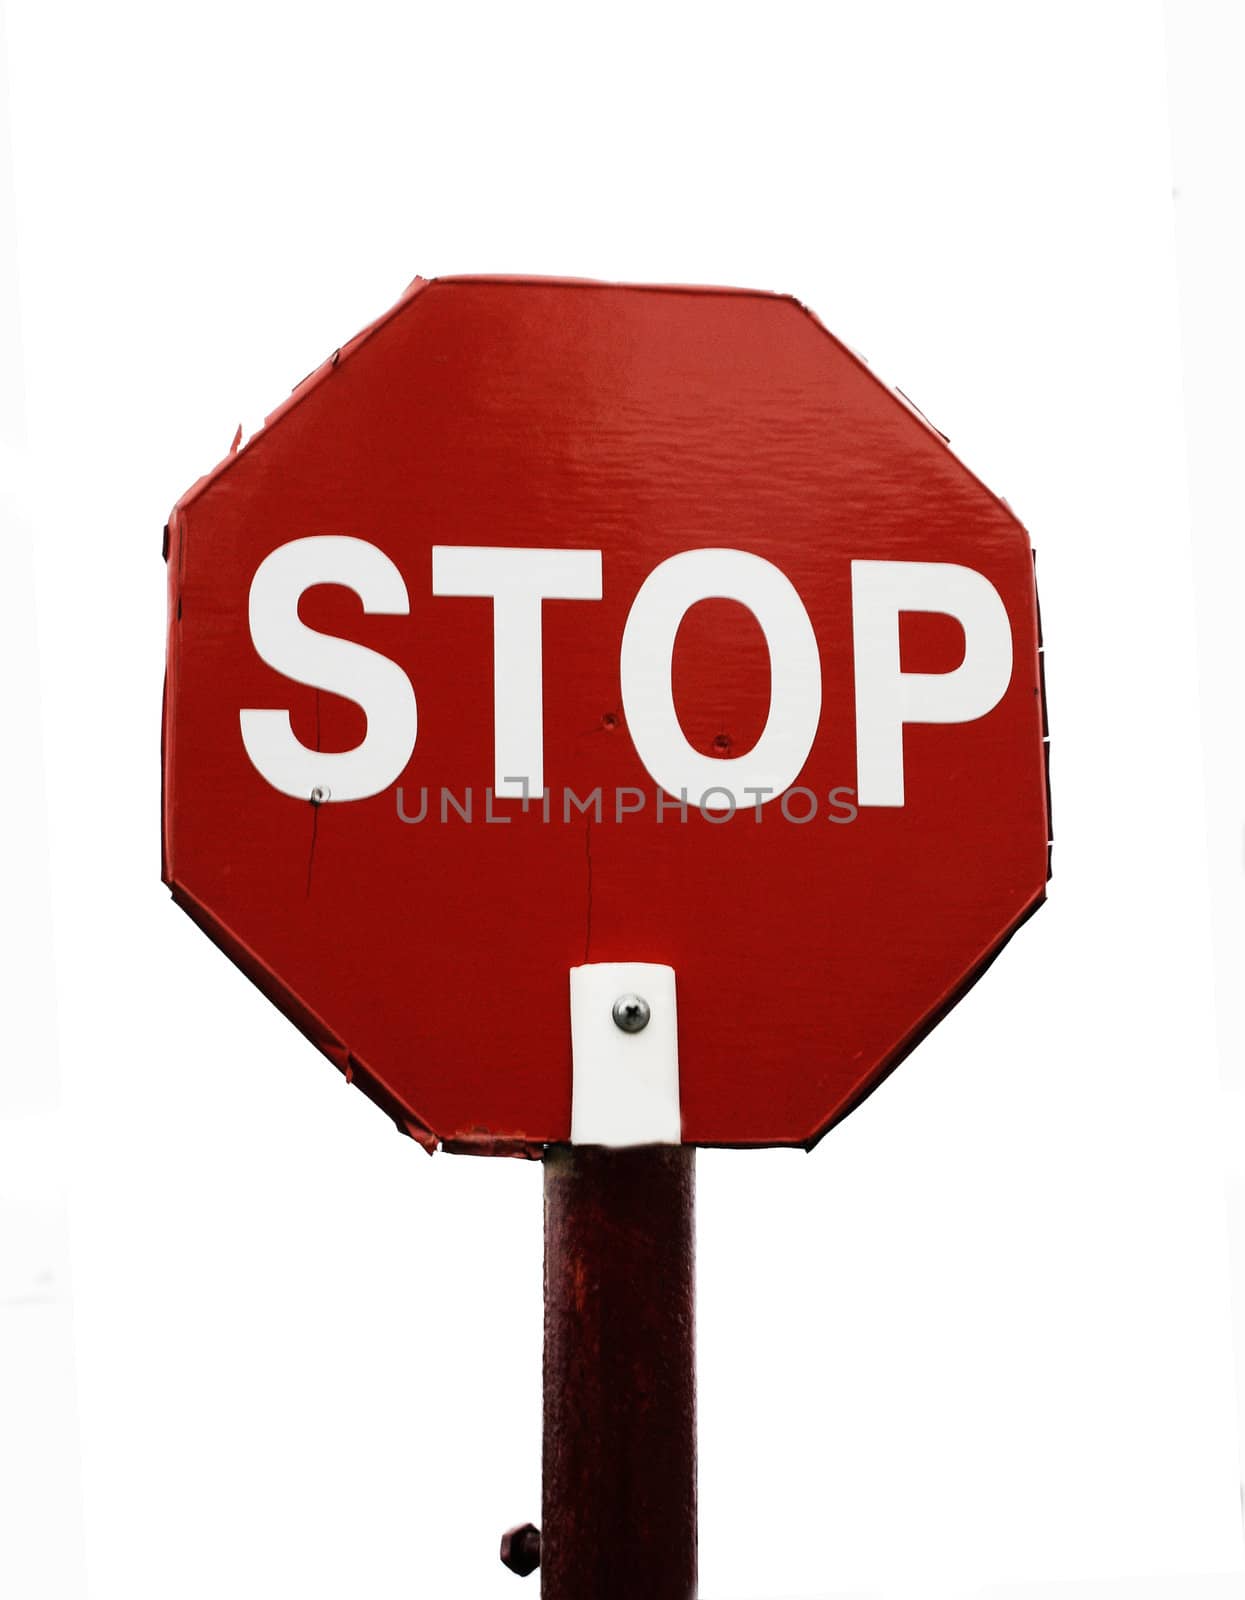 Stop sign by Katchen